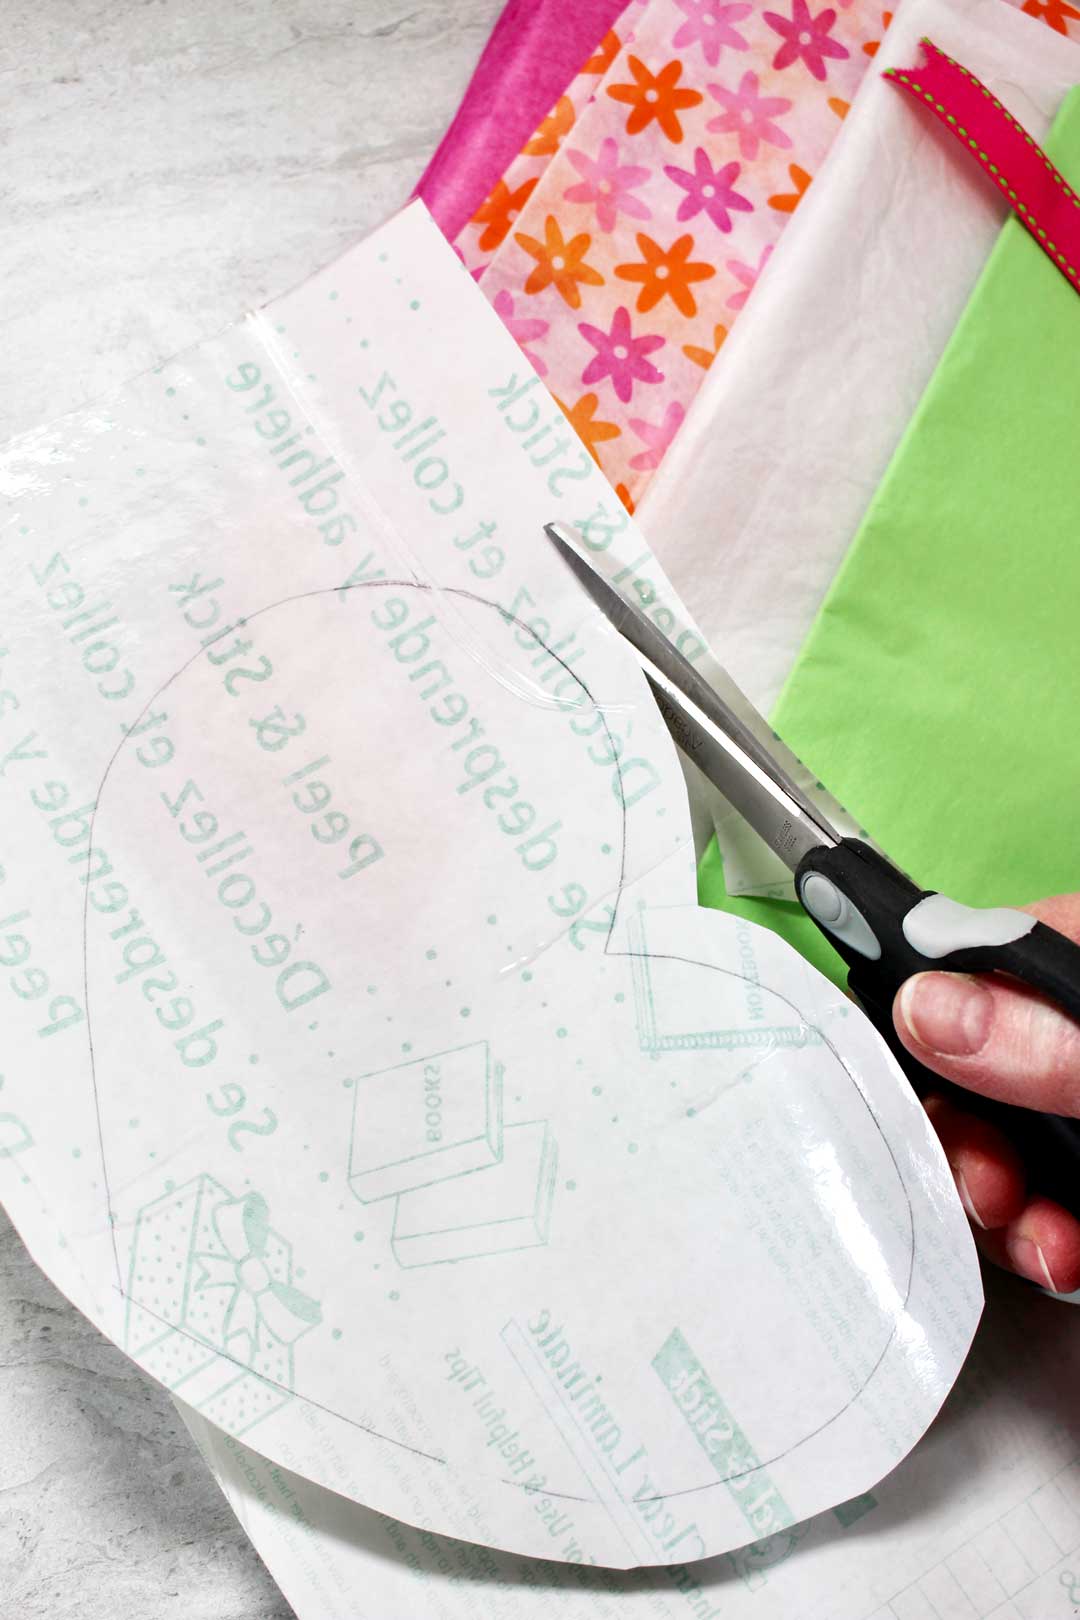 Cutting a heart pattern from contact paper, near pink, green, and flower patterned tissue paper.